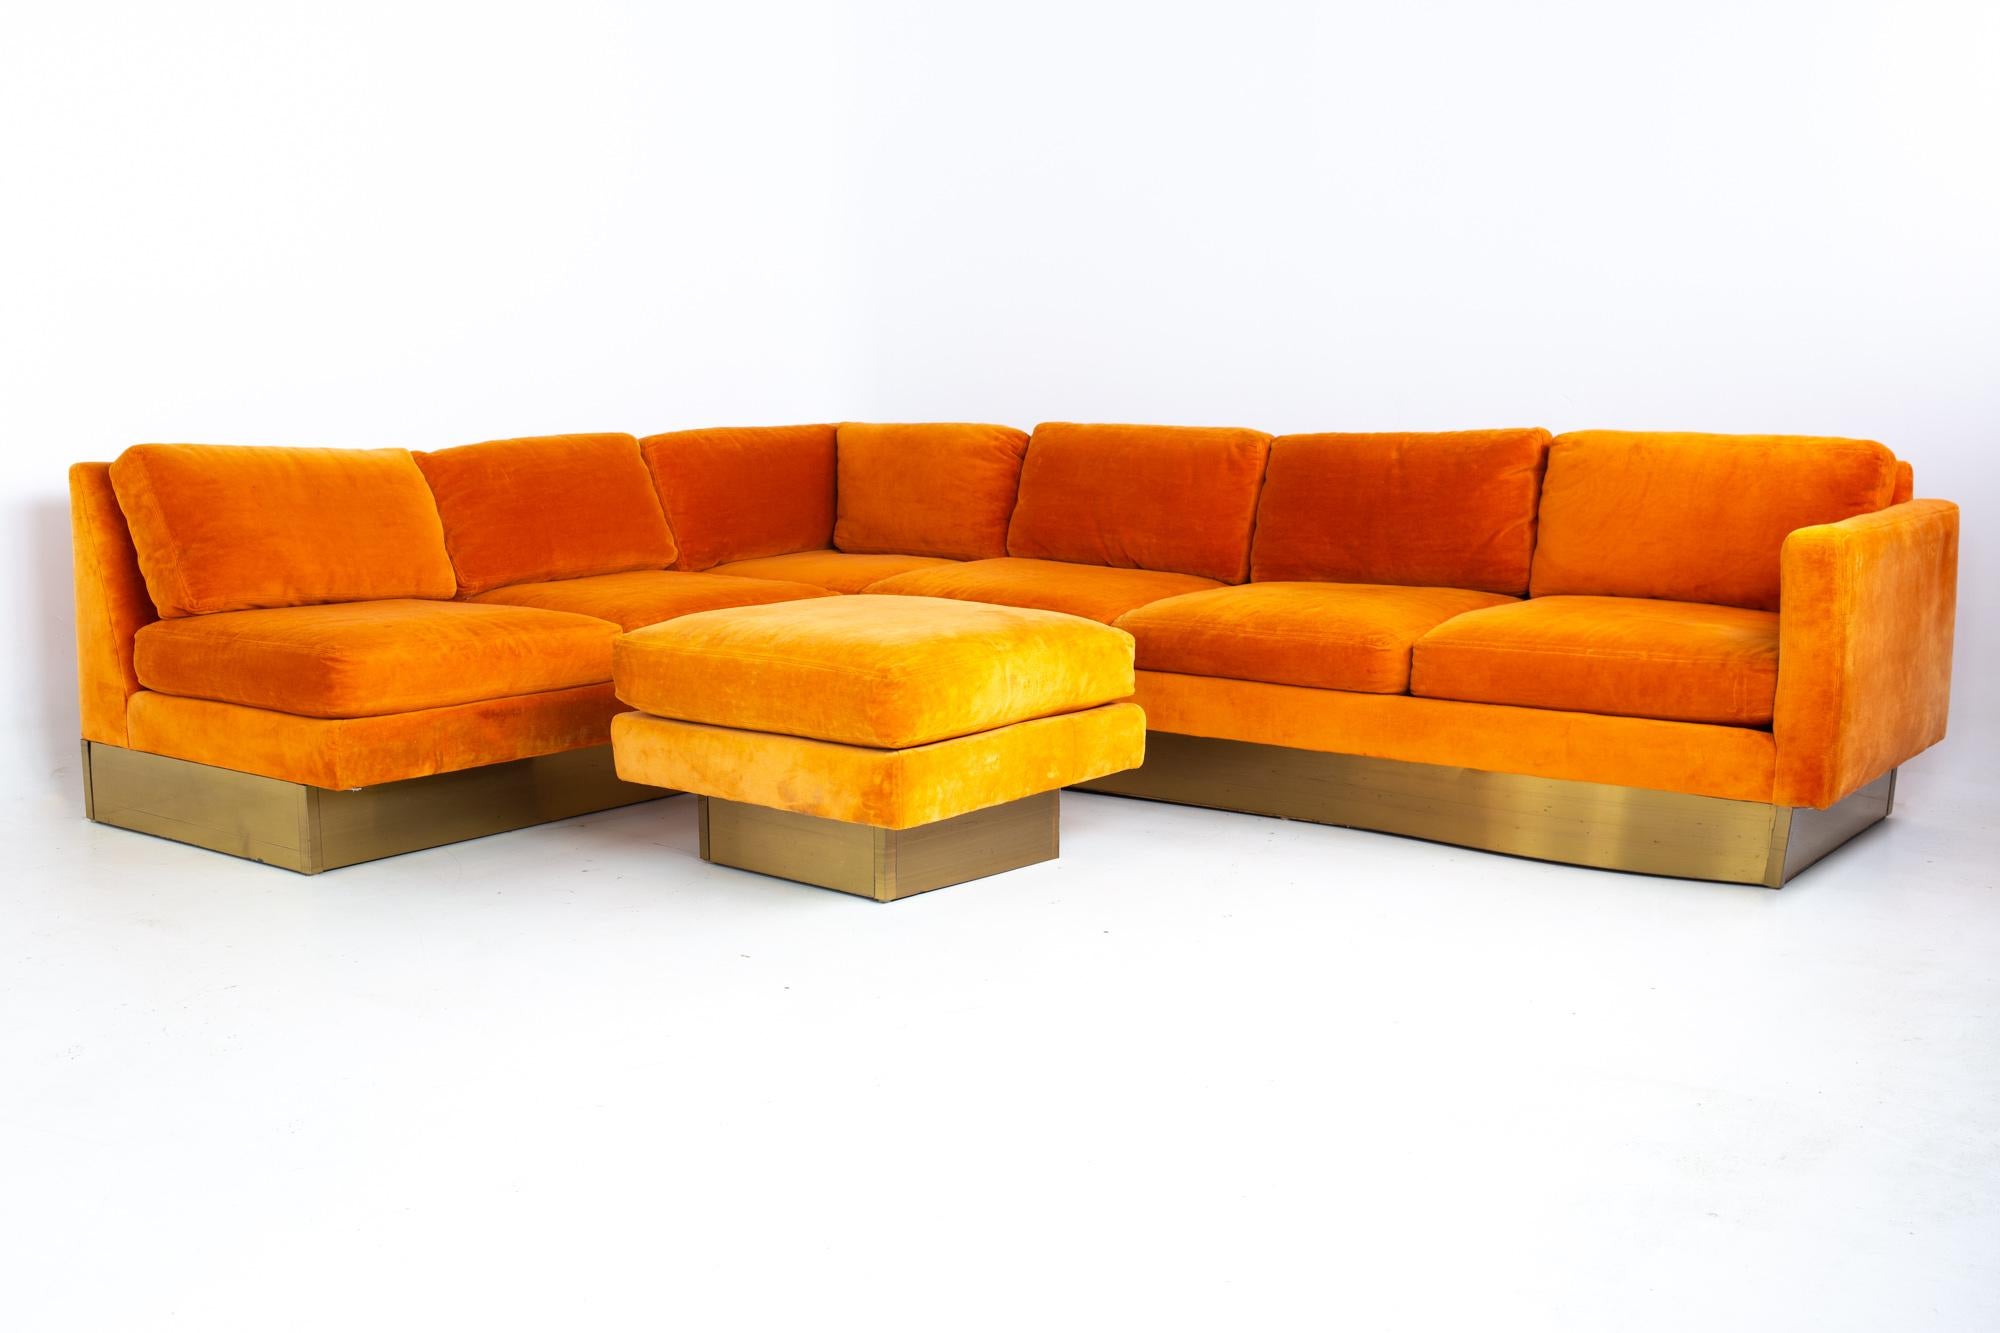 Milo Baughman style forecast furniture mid century orange velvet and bronze pedestal sectional sofa and ottoman
Sectional measures: 156 wide x 32 deep x 27 high, with a seat height of 16 inches

All pieces of furniture can be had in what we call